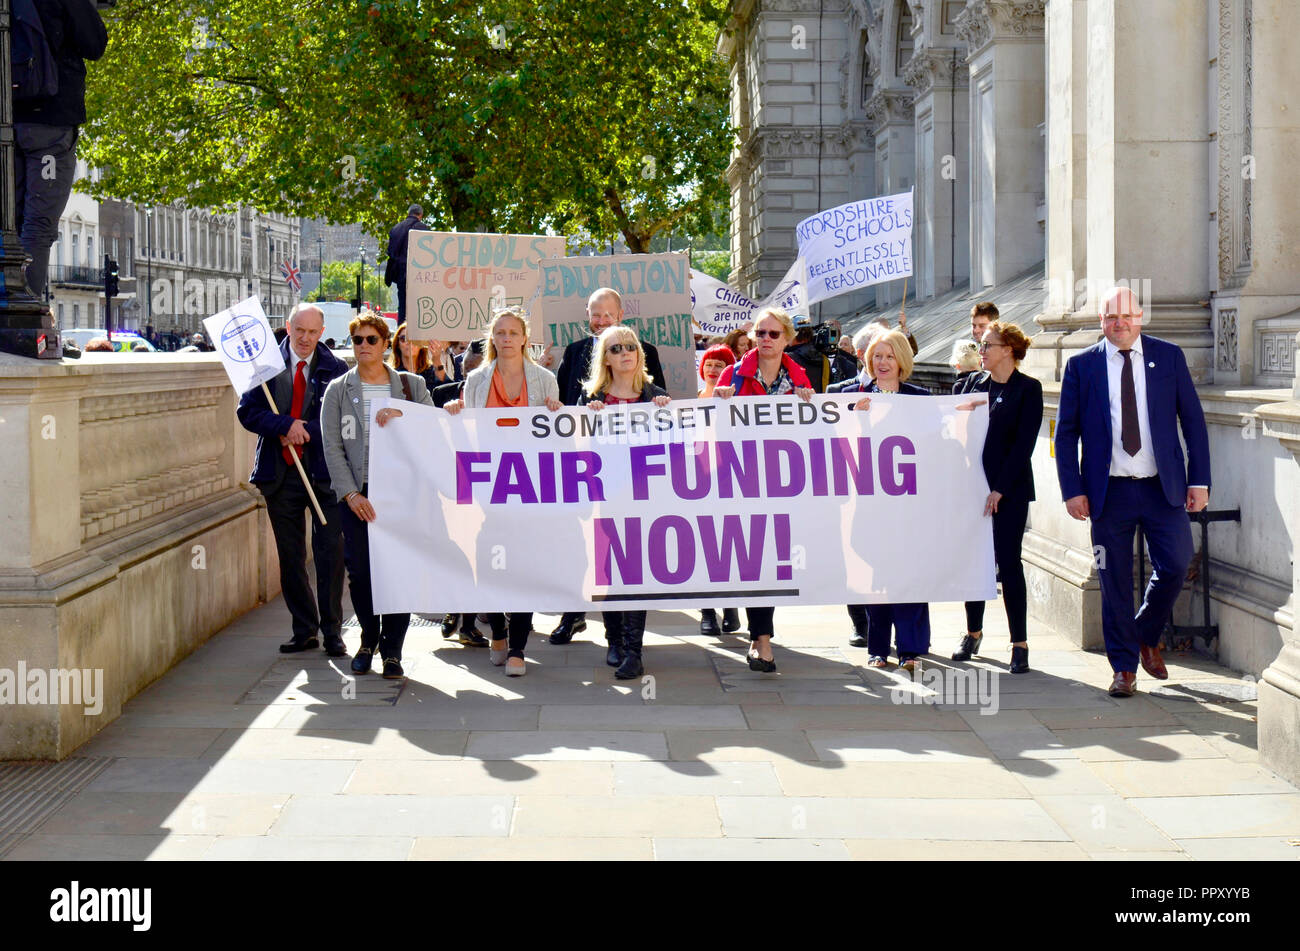 Westminster, UK. 28th Sept 2018. Up to 1000 head teachers assemble for a rally in Parliament Square before marching to Downing Street to hand in a letter to No 11 to protest against real term cuts in the education budget and demanding extra funding for schools. Credit: PjrFoto/Alamy Live News Stock Photo